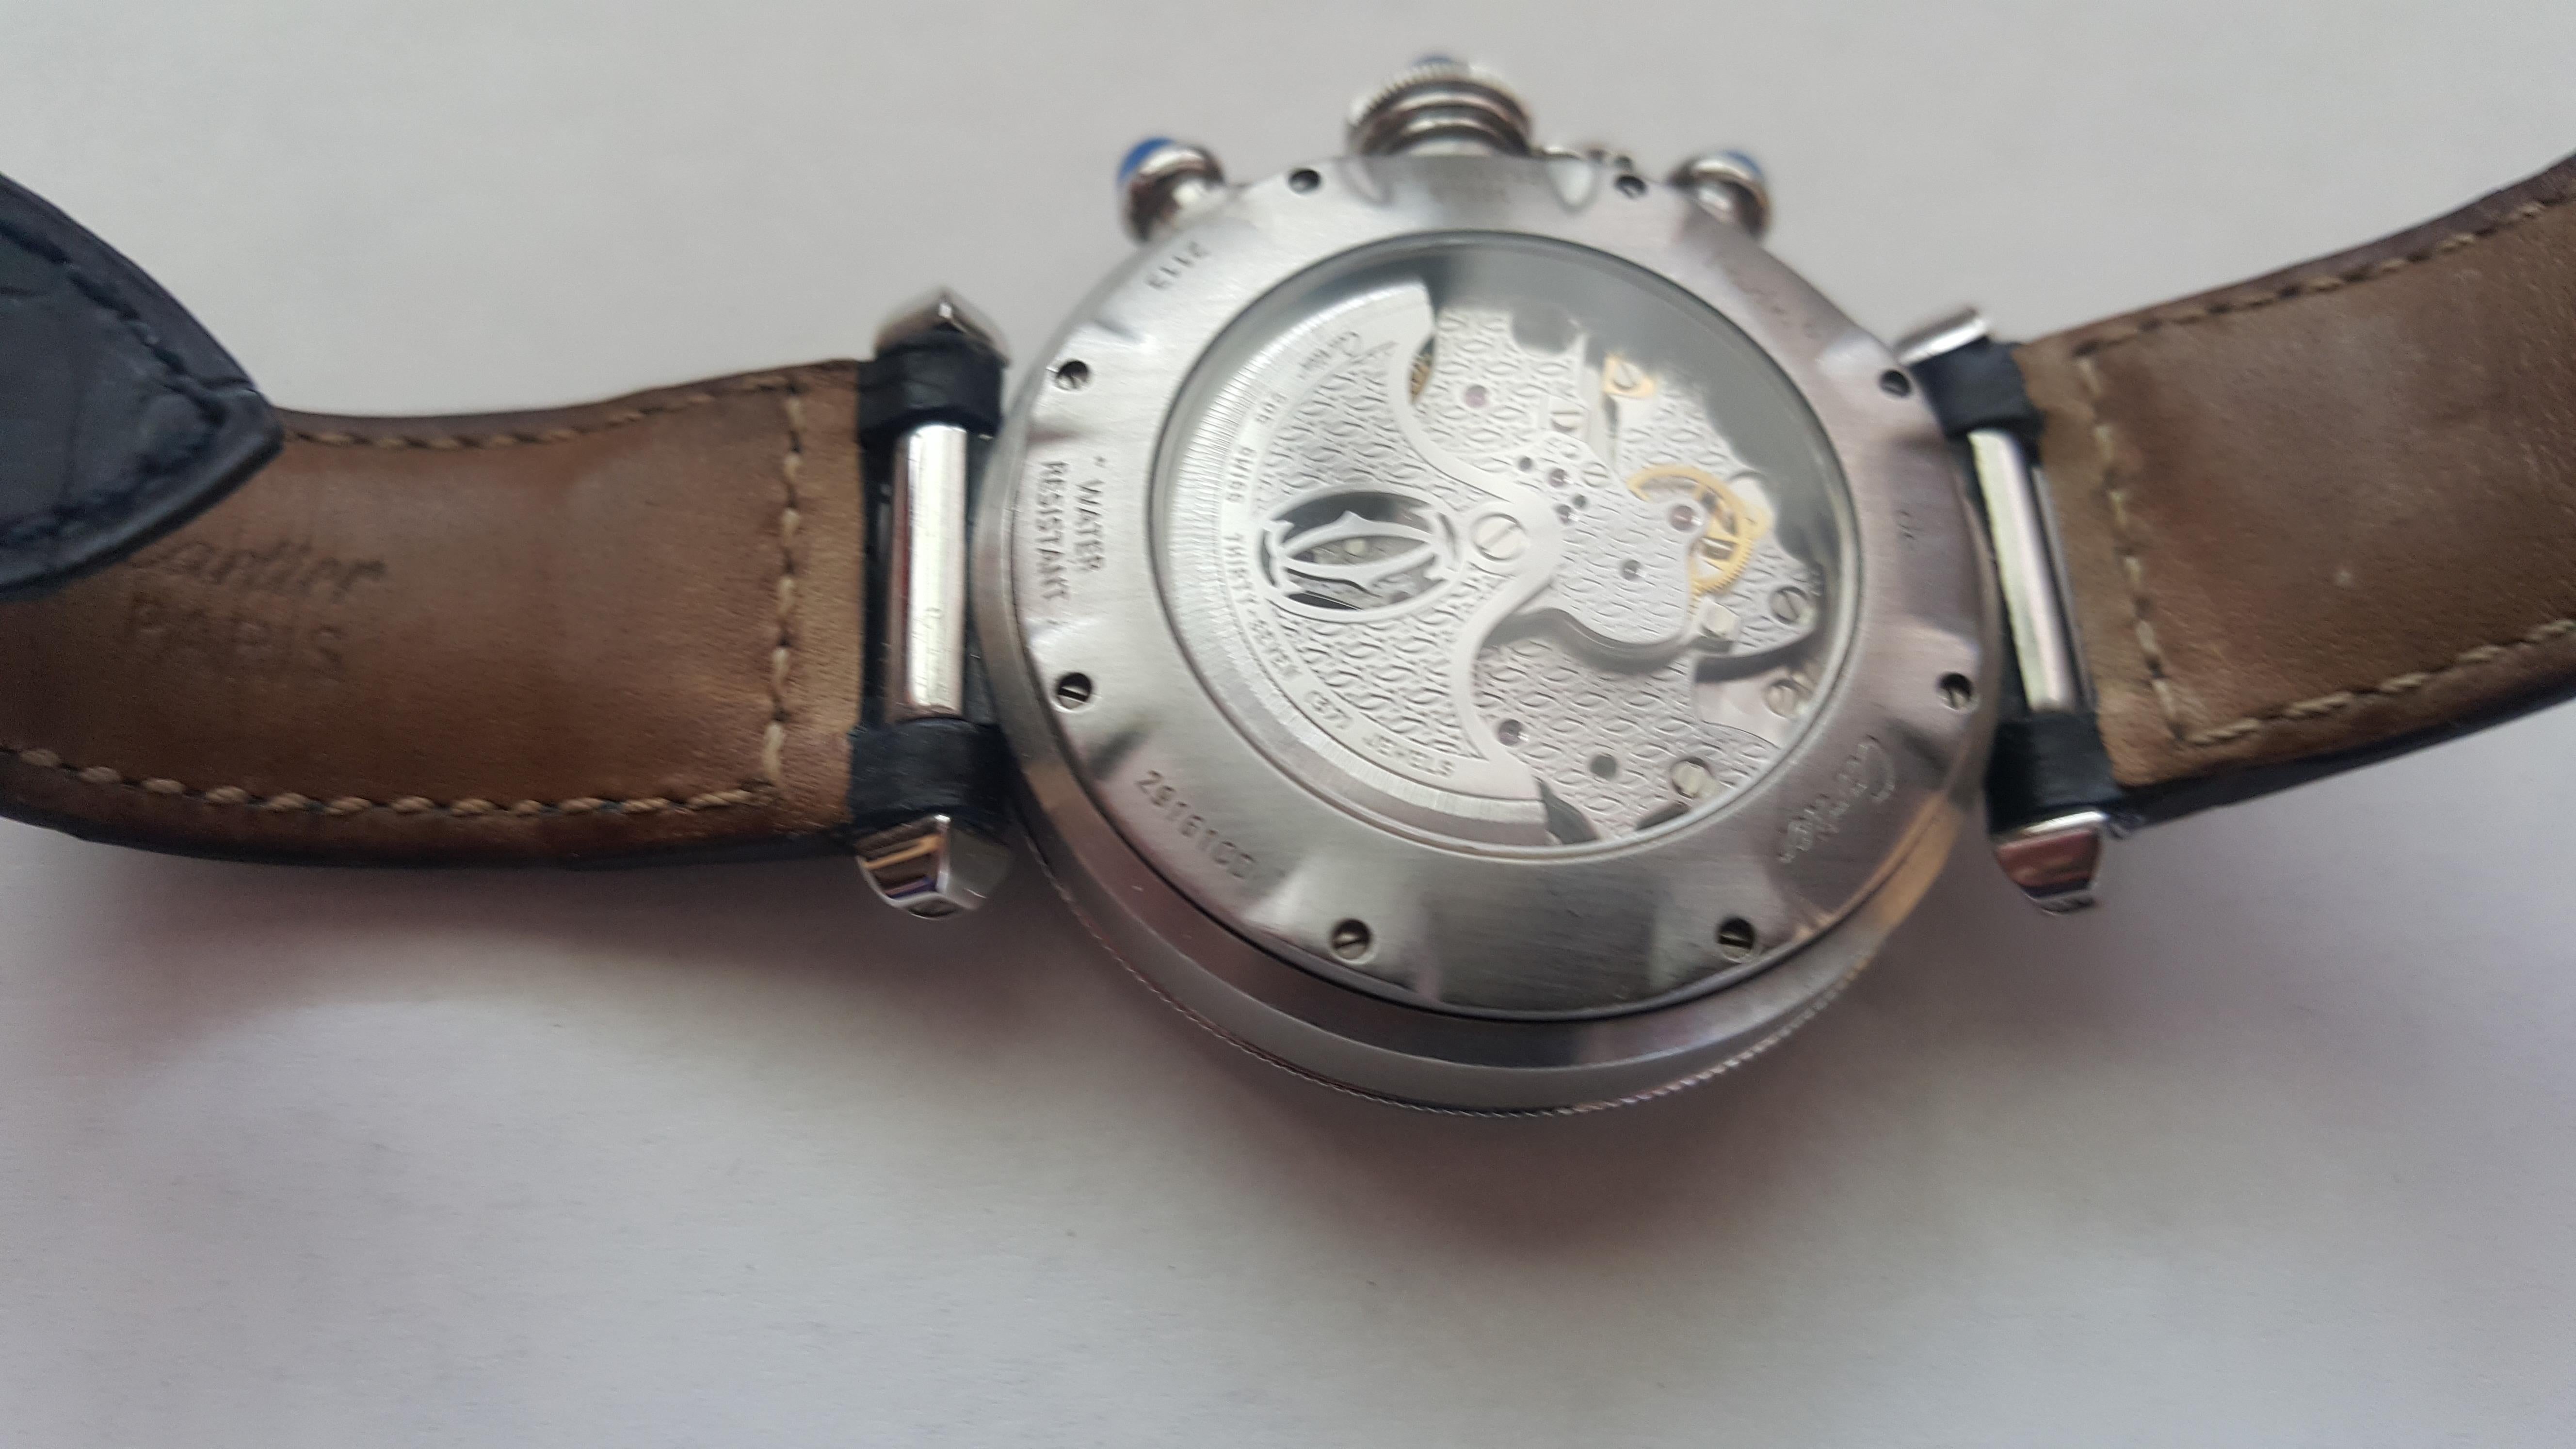 Cartier de Pasha Watch Chronograph Stainless Steel 2113 Automatic 38mm In Good Condition In Rancho Santa Fe, CA